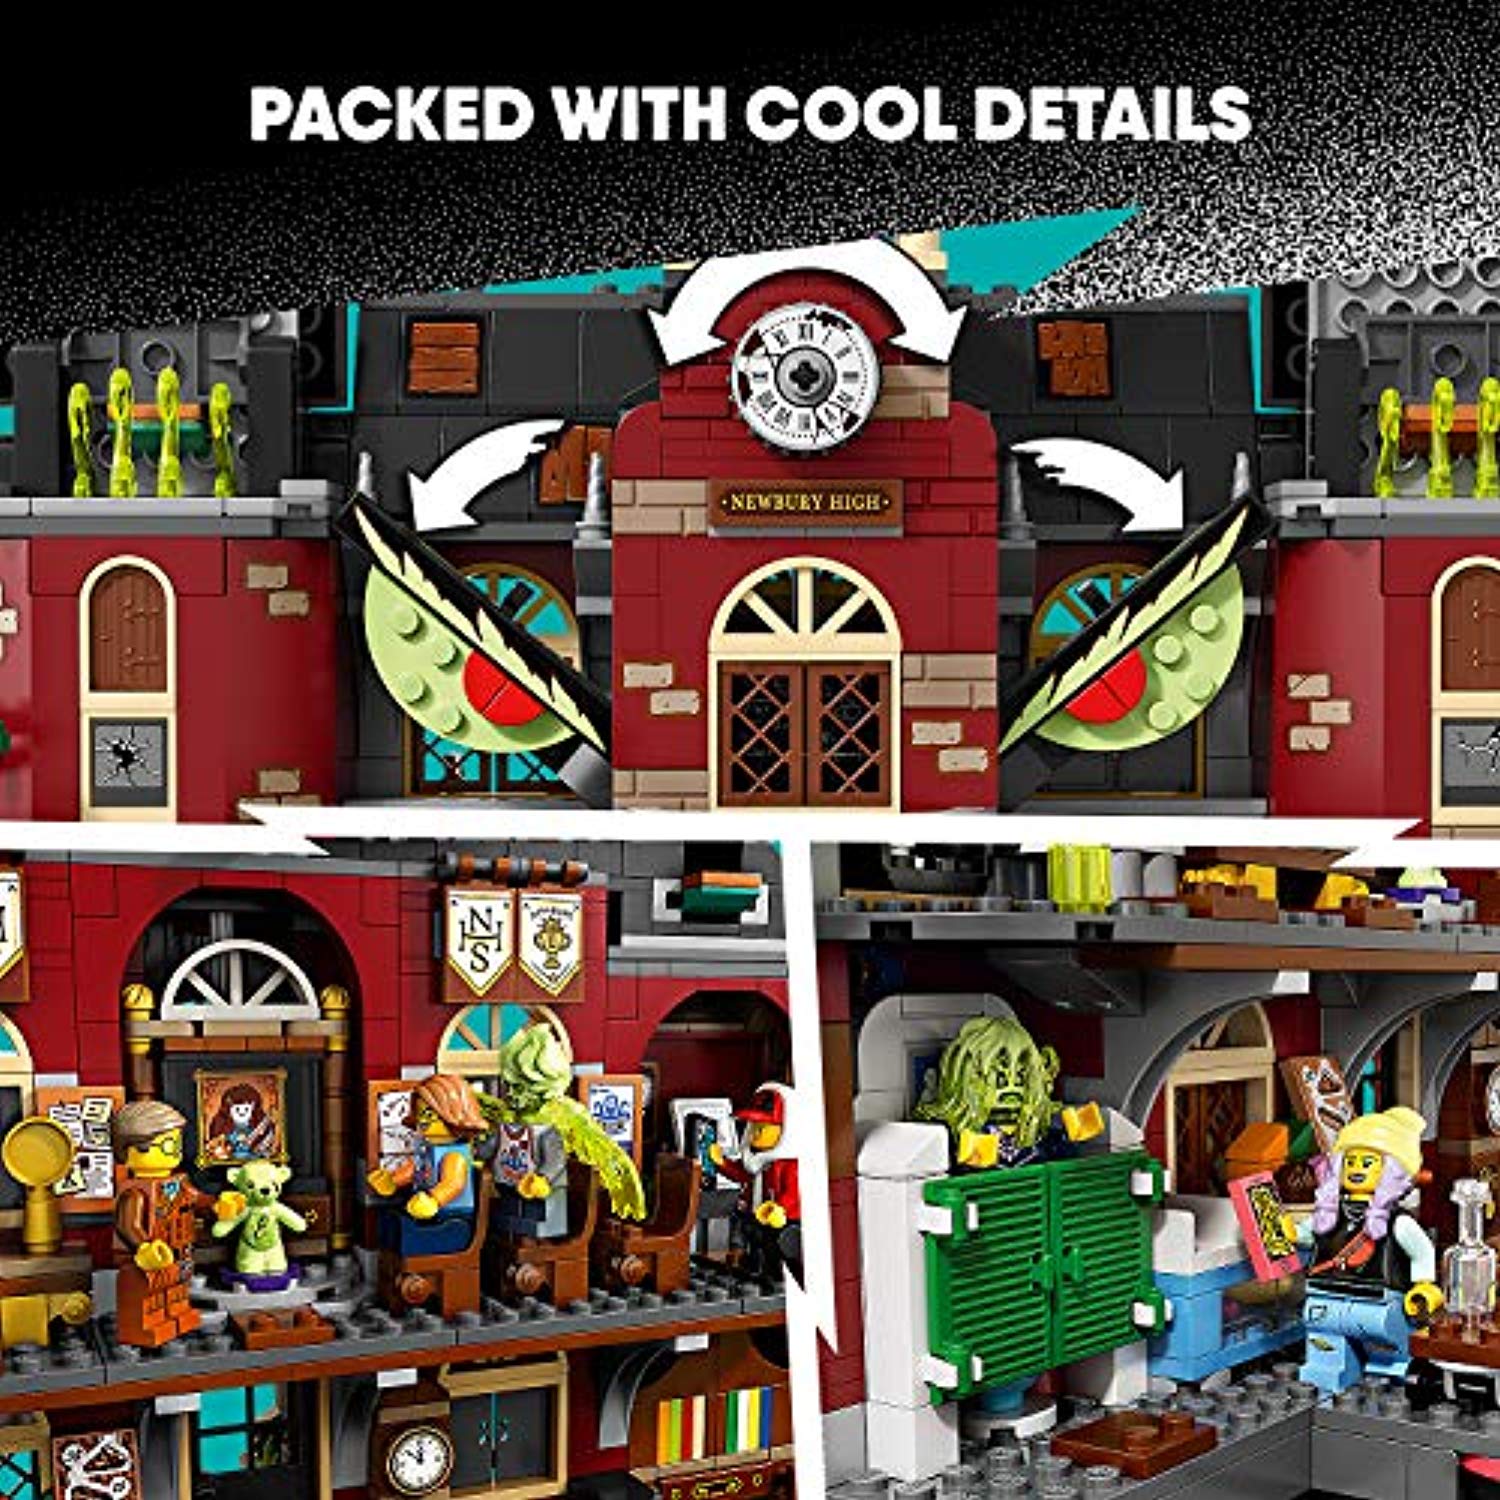 LEGO 70425 Hidden Side Haunted High School Construction Set, AR Games App, Interactive Augmented Reality Ghost Hunt for iPhone/Android - Offer Games